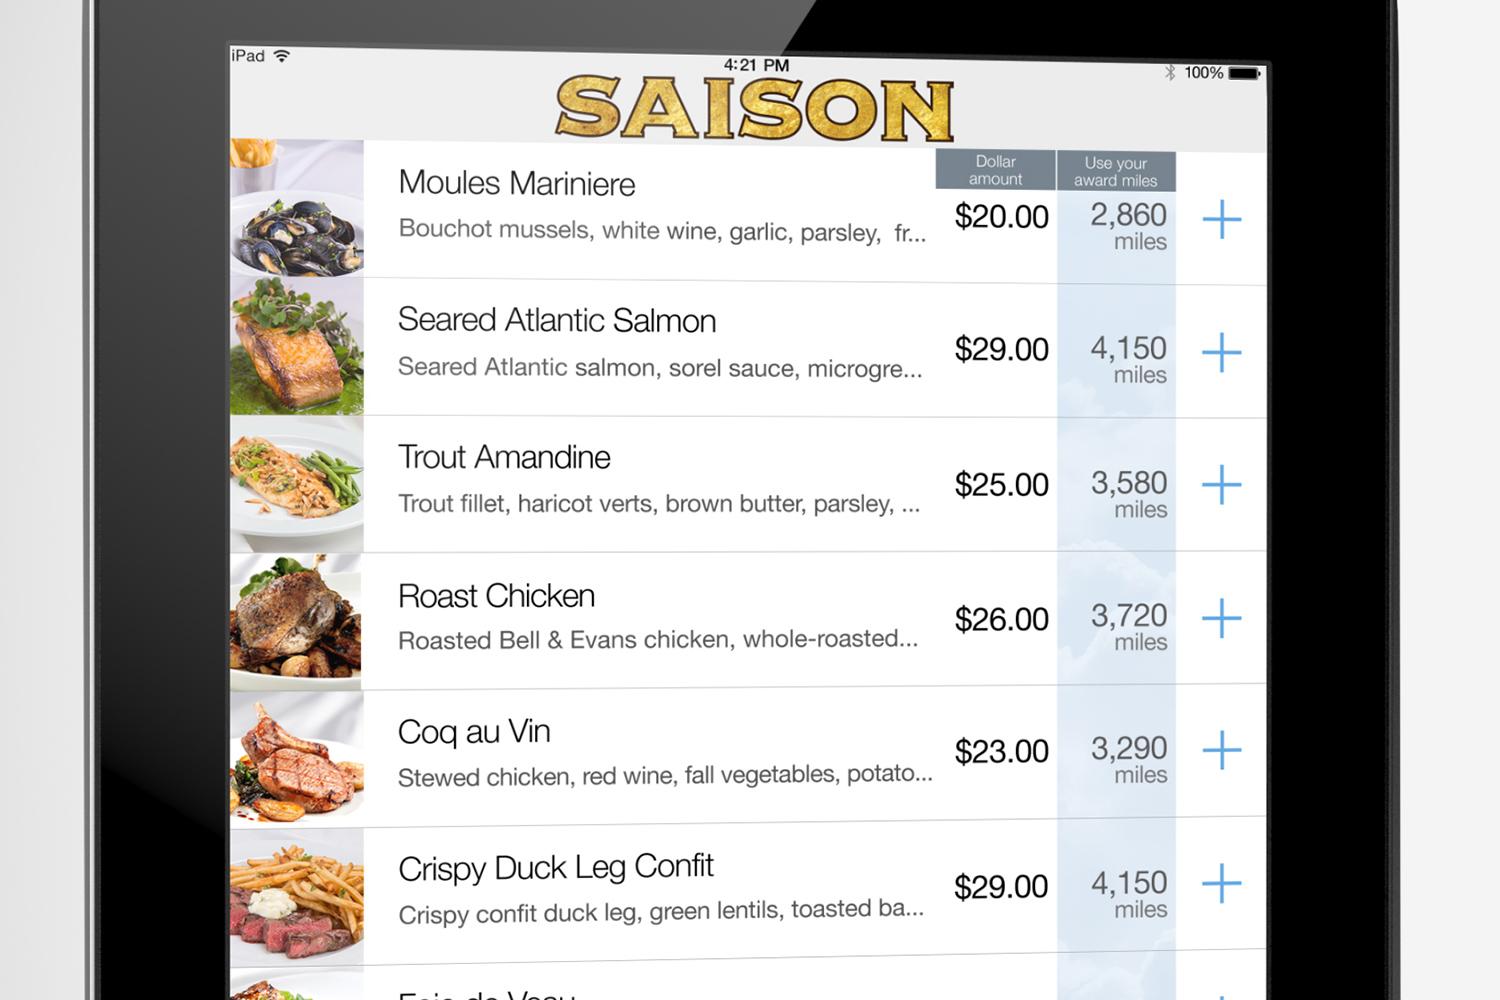 ipads are replacing waiters in airport restaurants pay by miles 02